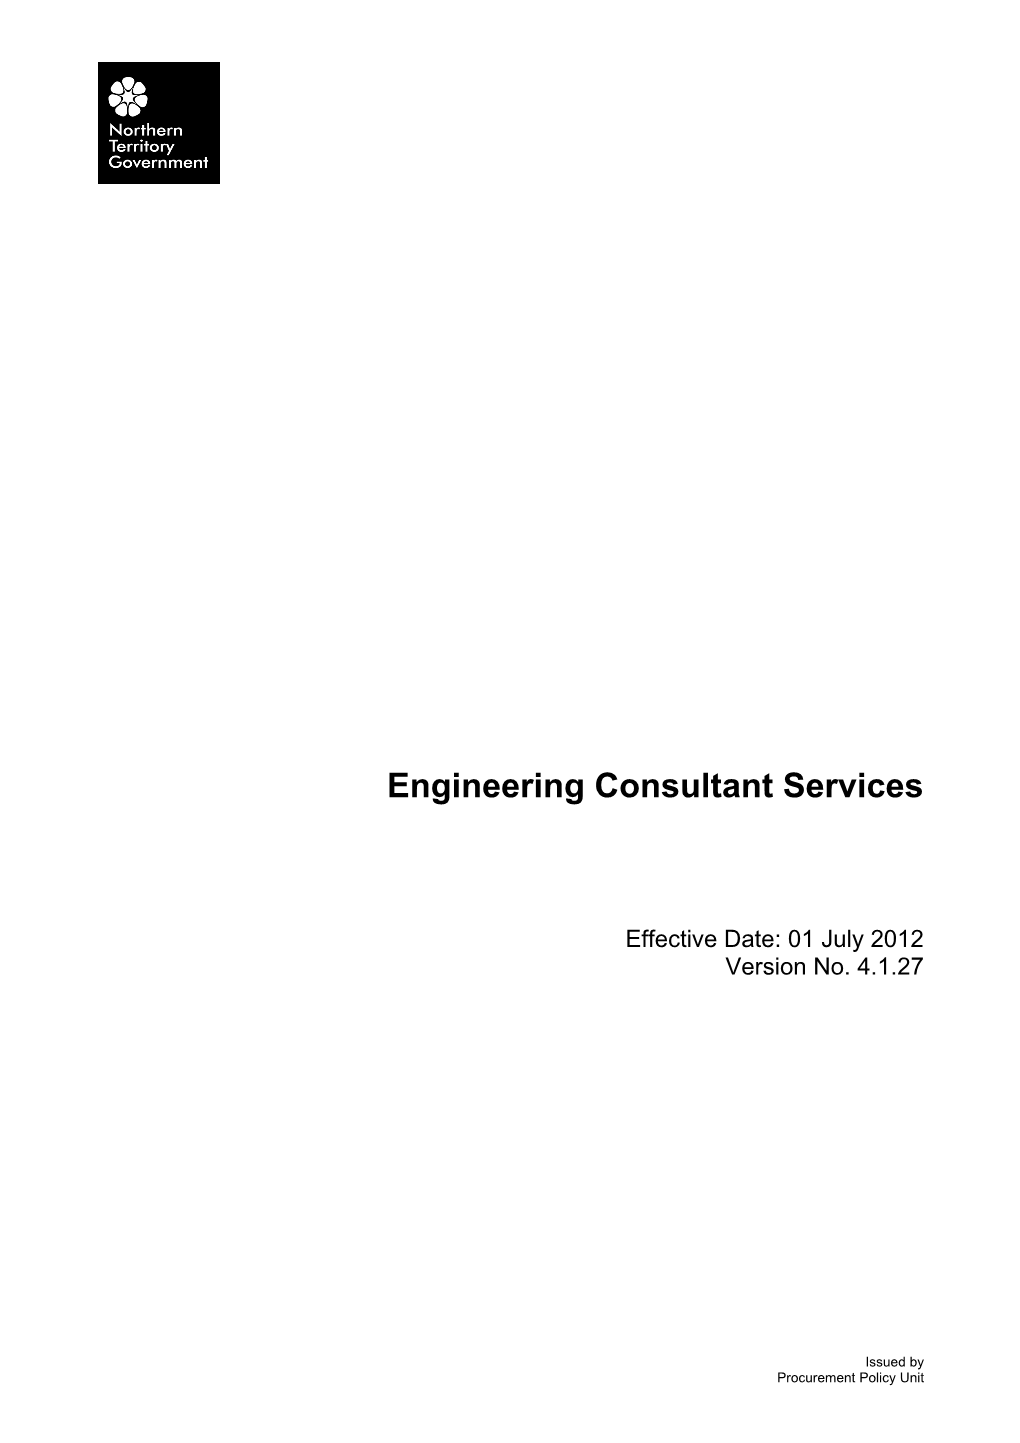 Engineering Consultant Services - V 4.1.27 (01 July 2012)